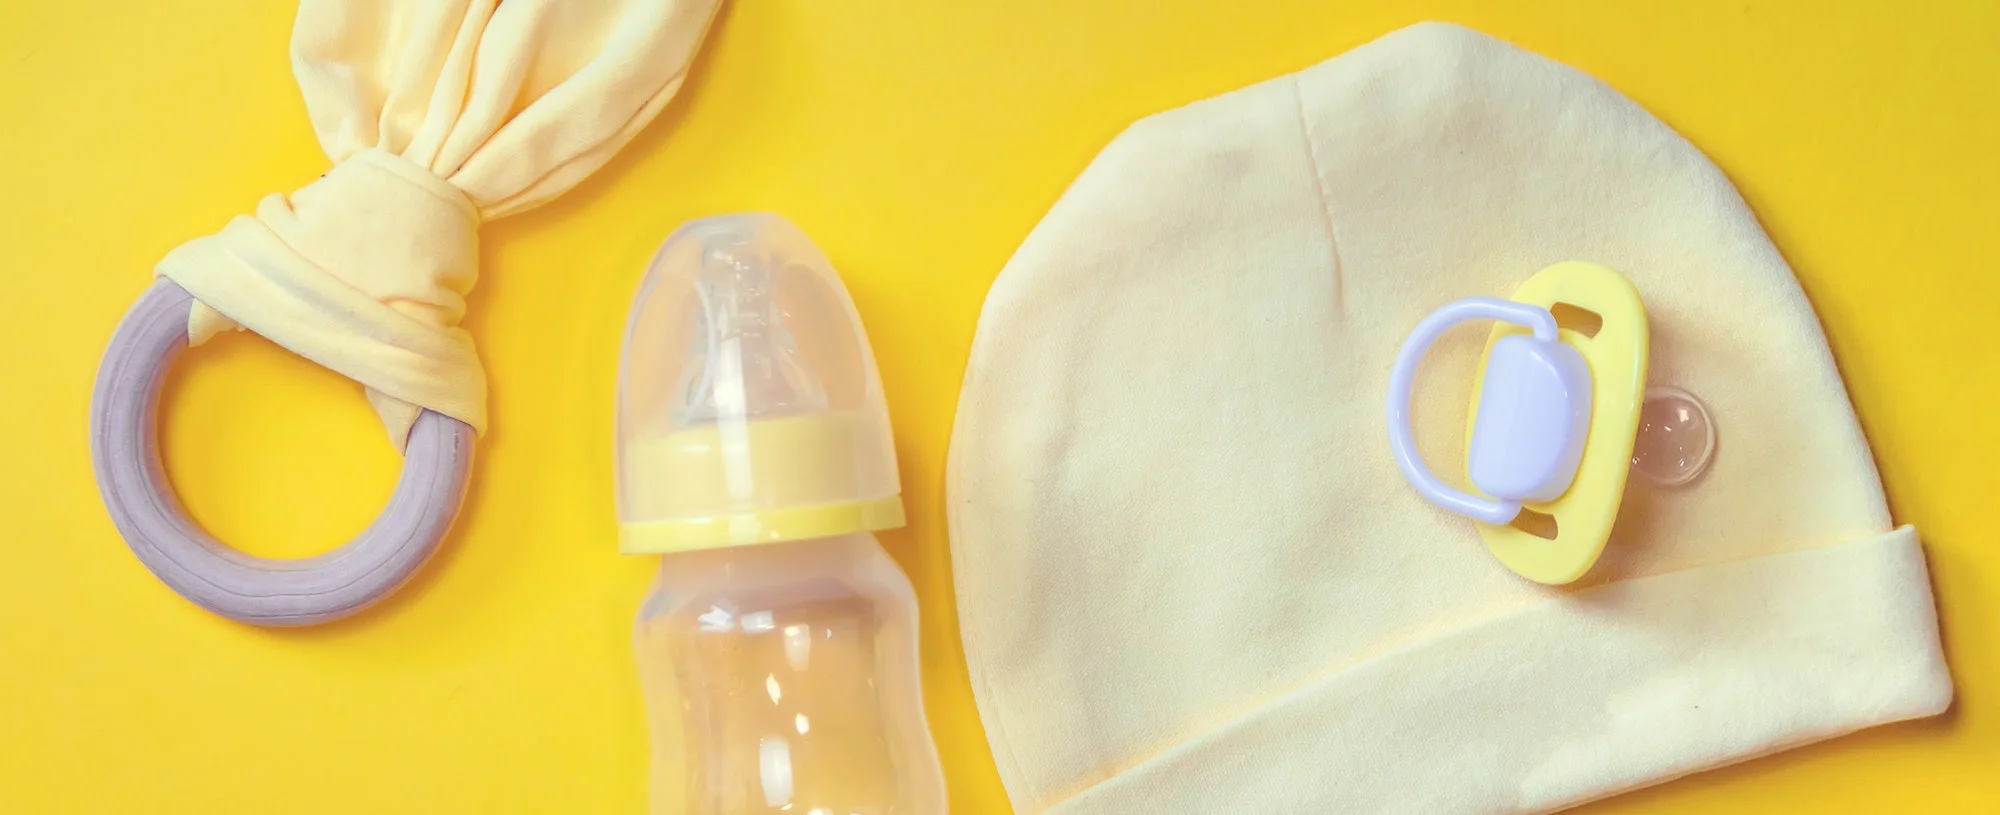 Accessories for newborns on a yellow background. Selective focus.